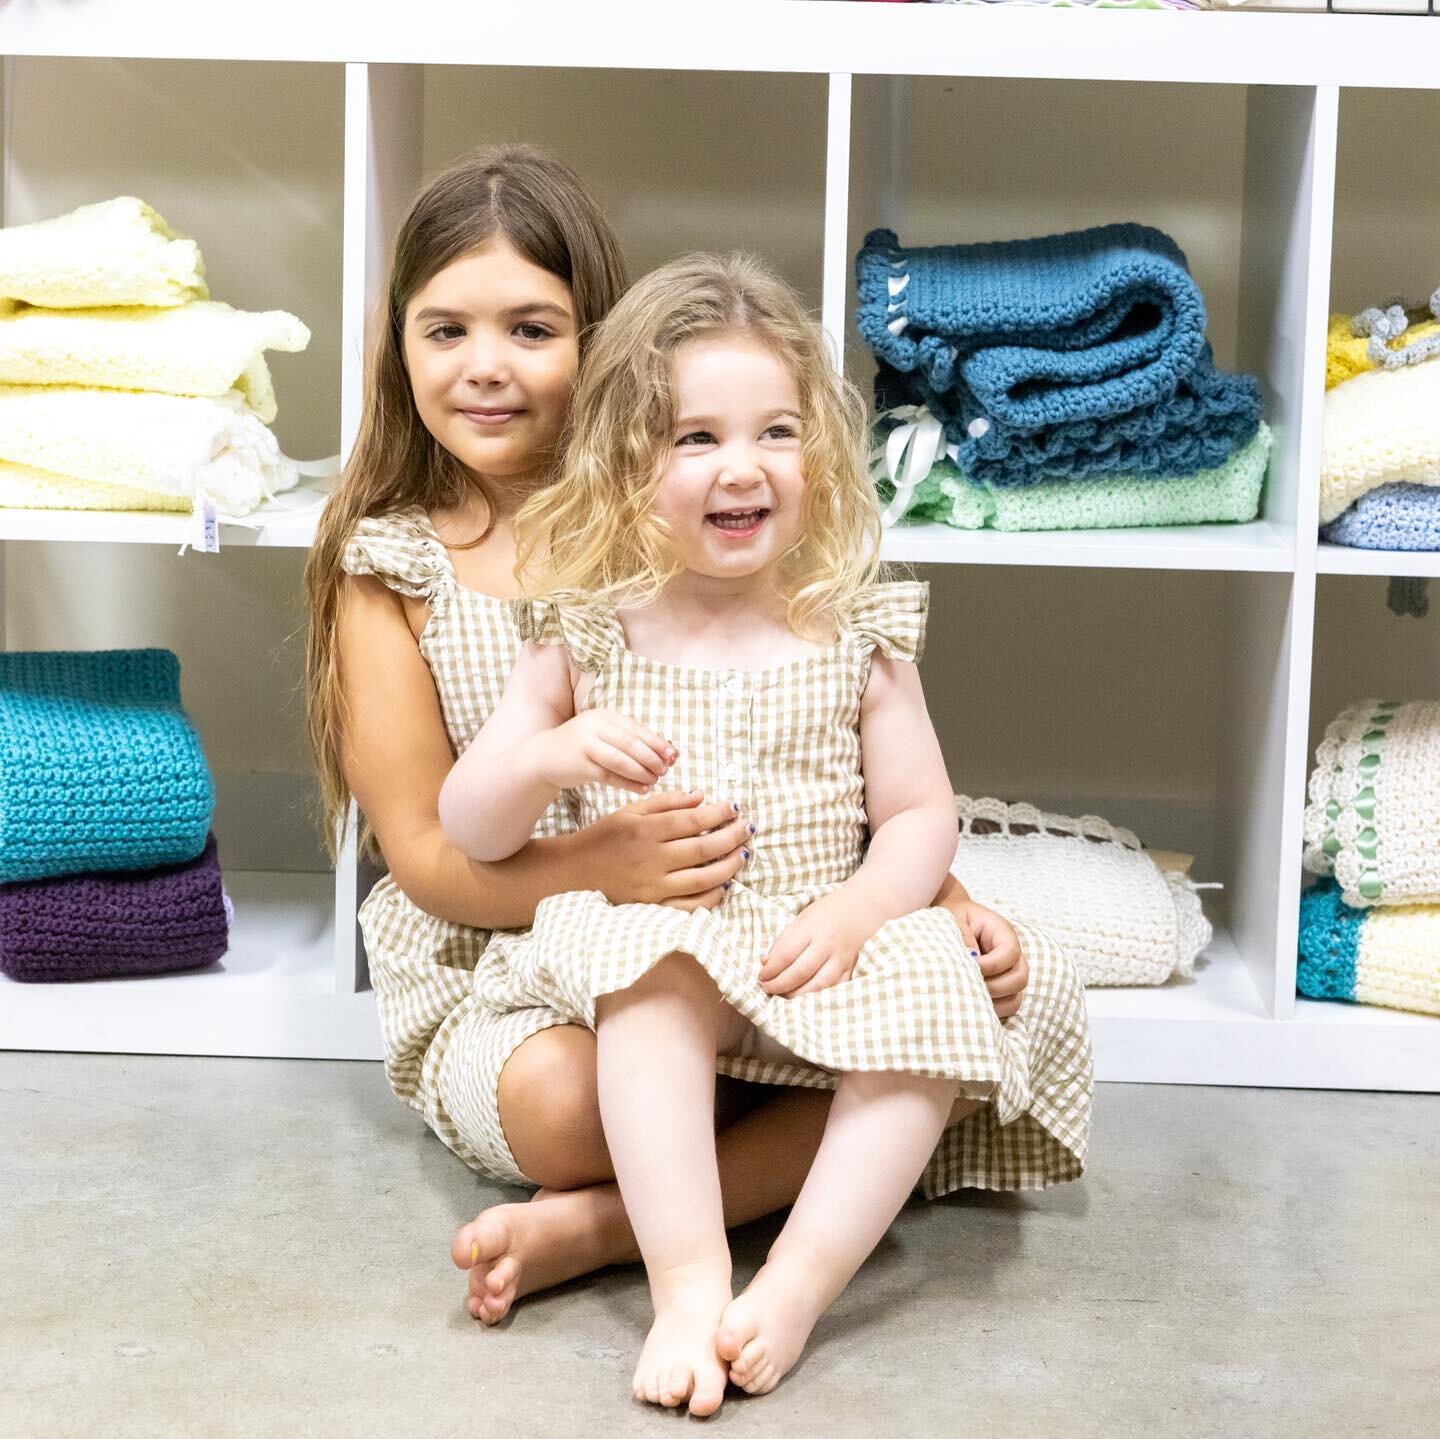 Run, don&rsquo;t walk to @abigailskidscloset for the cutest looks for your little ones this summer! Located in the Whizin&rsquo;s Center in #AgouraHills, this sweet shop was opened by a local Malibu couple who dreamed of opening a more carefully cura